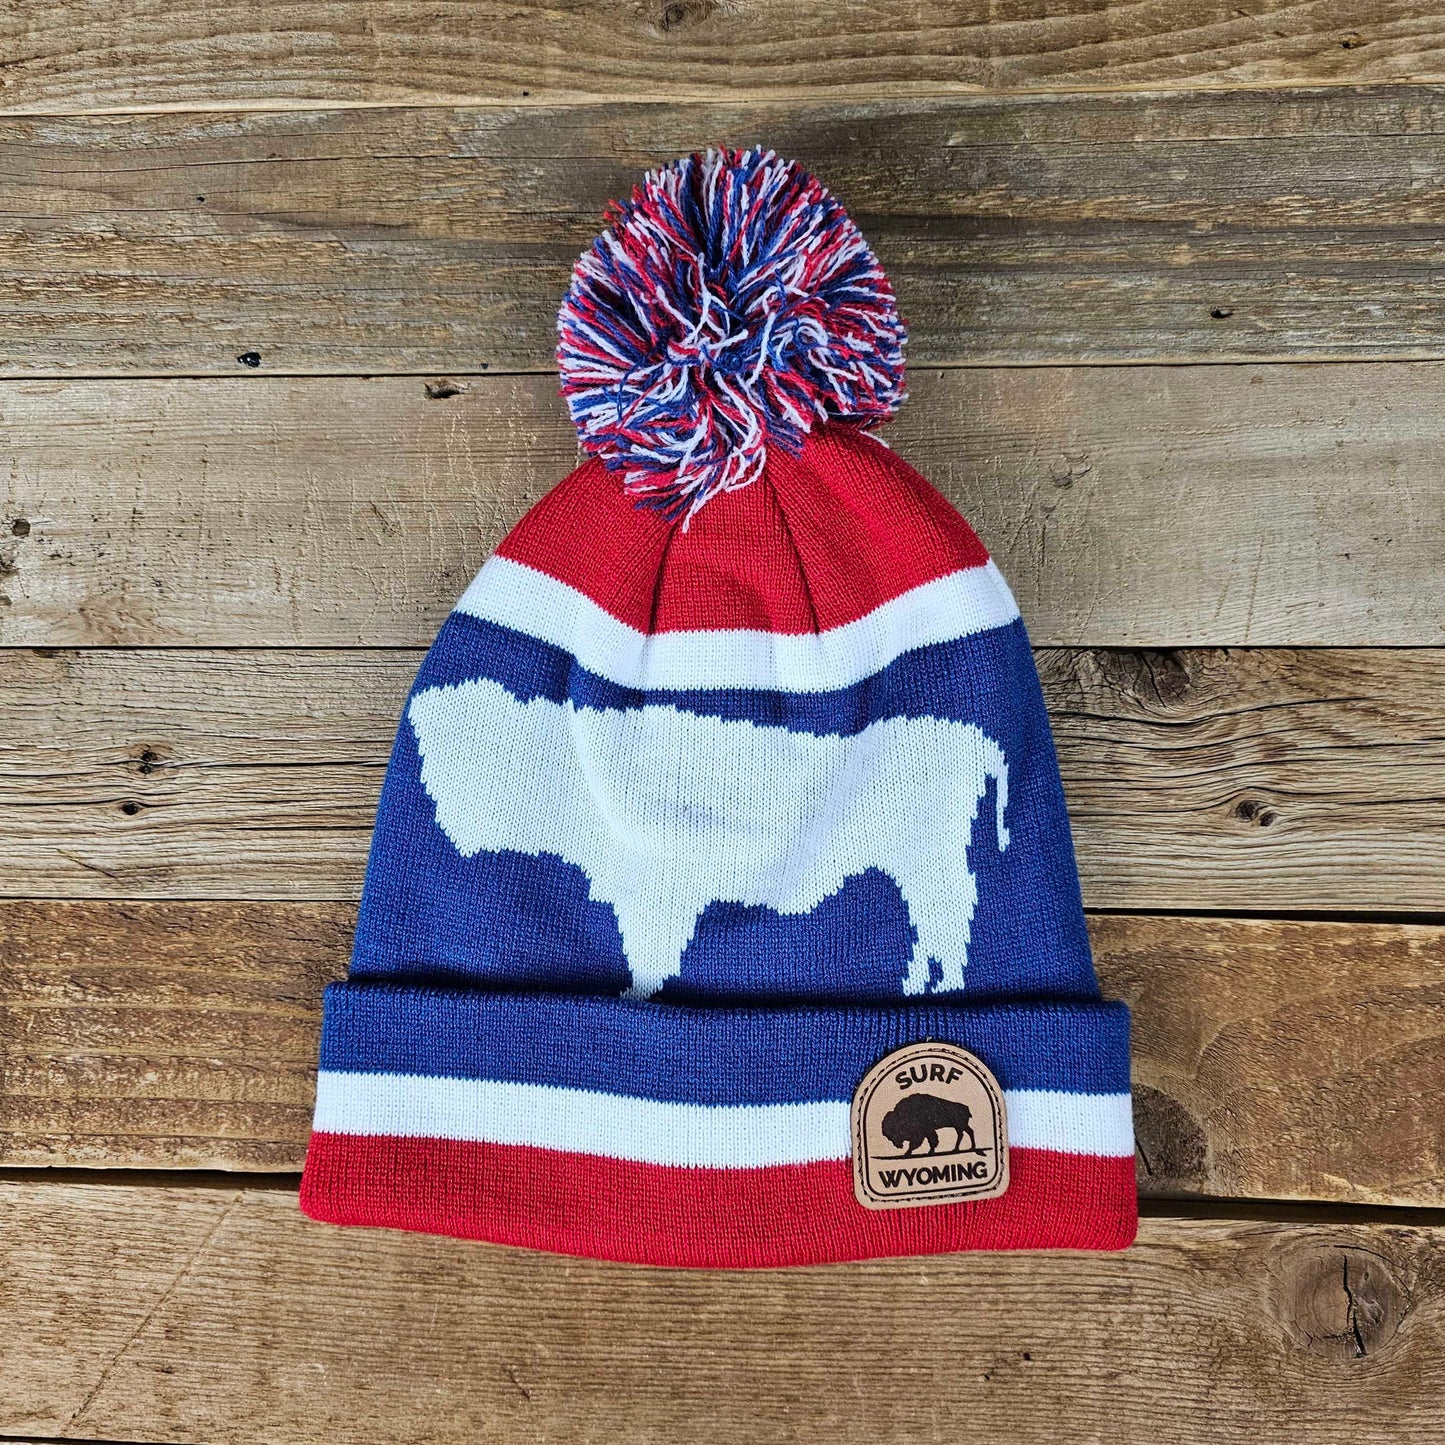 Surf Wyoming Leather Bison Patch Pom Beanie • Red/White/Blue